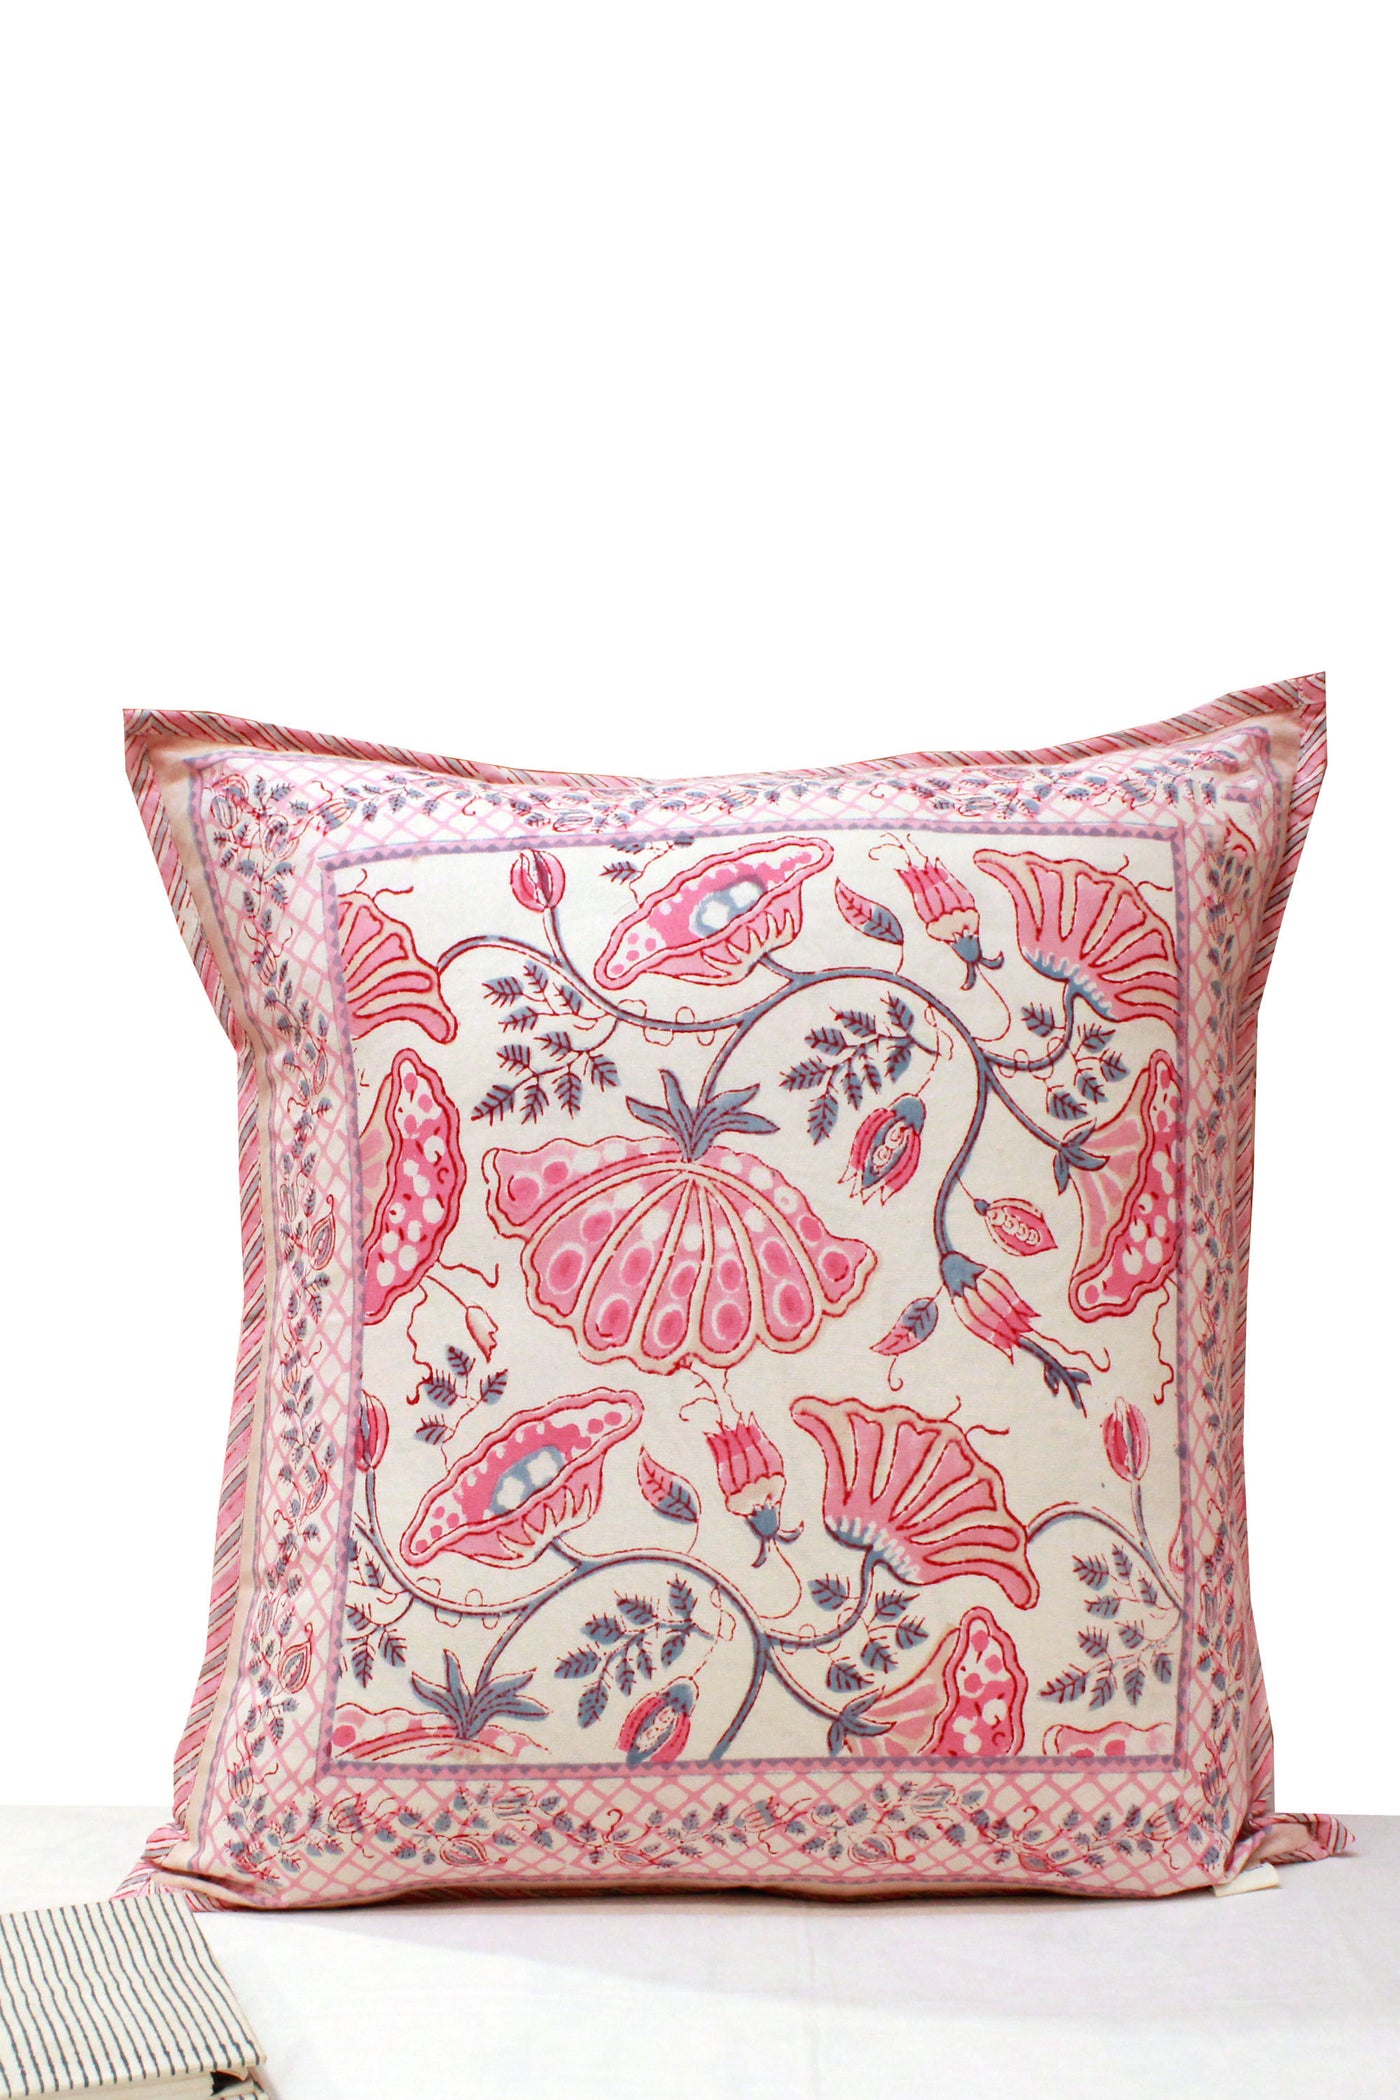 Cotton Flower Jaal Hand Block Printed Cushion Cover in Kashish Pink